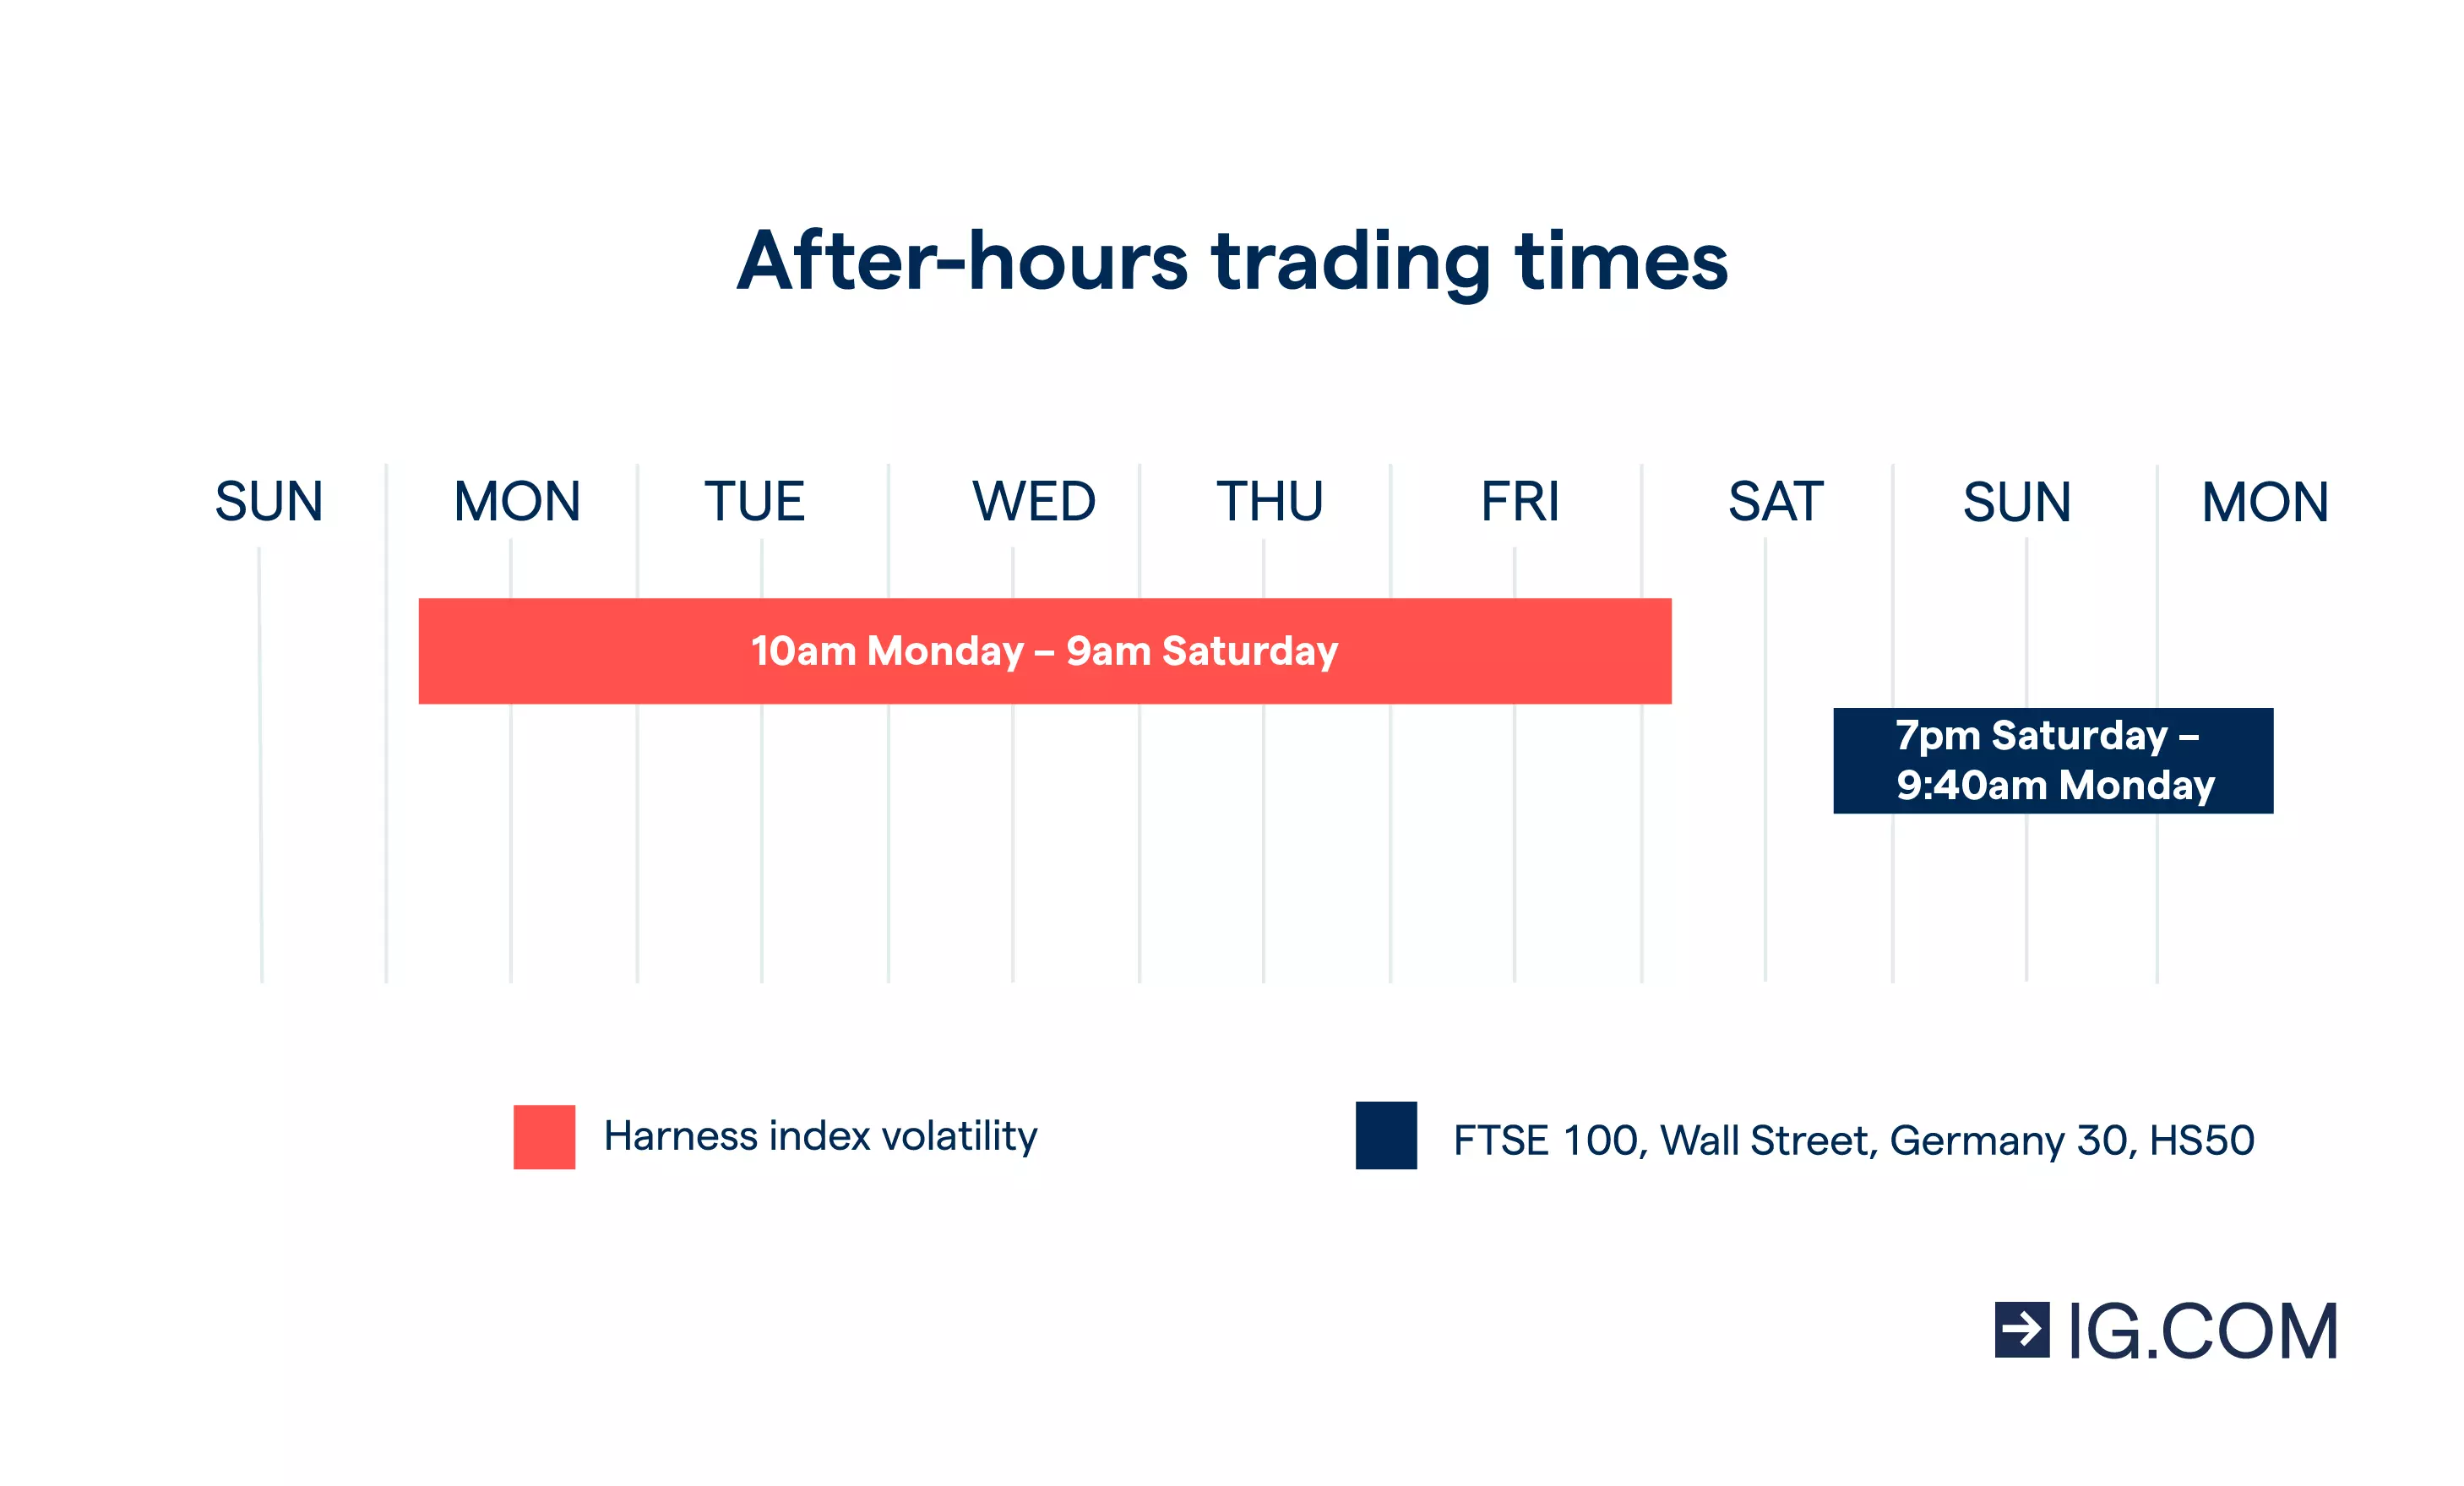 Indices out of hours trading